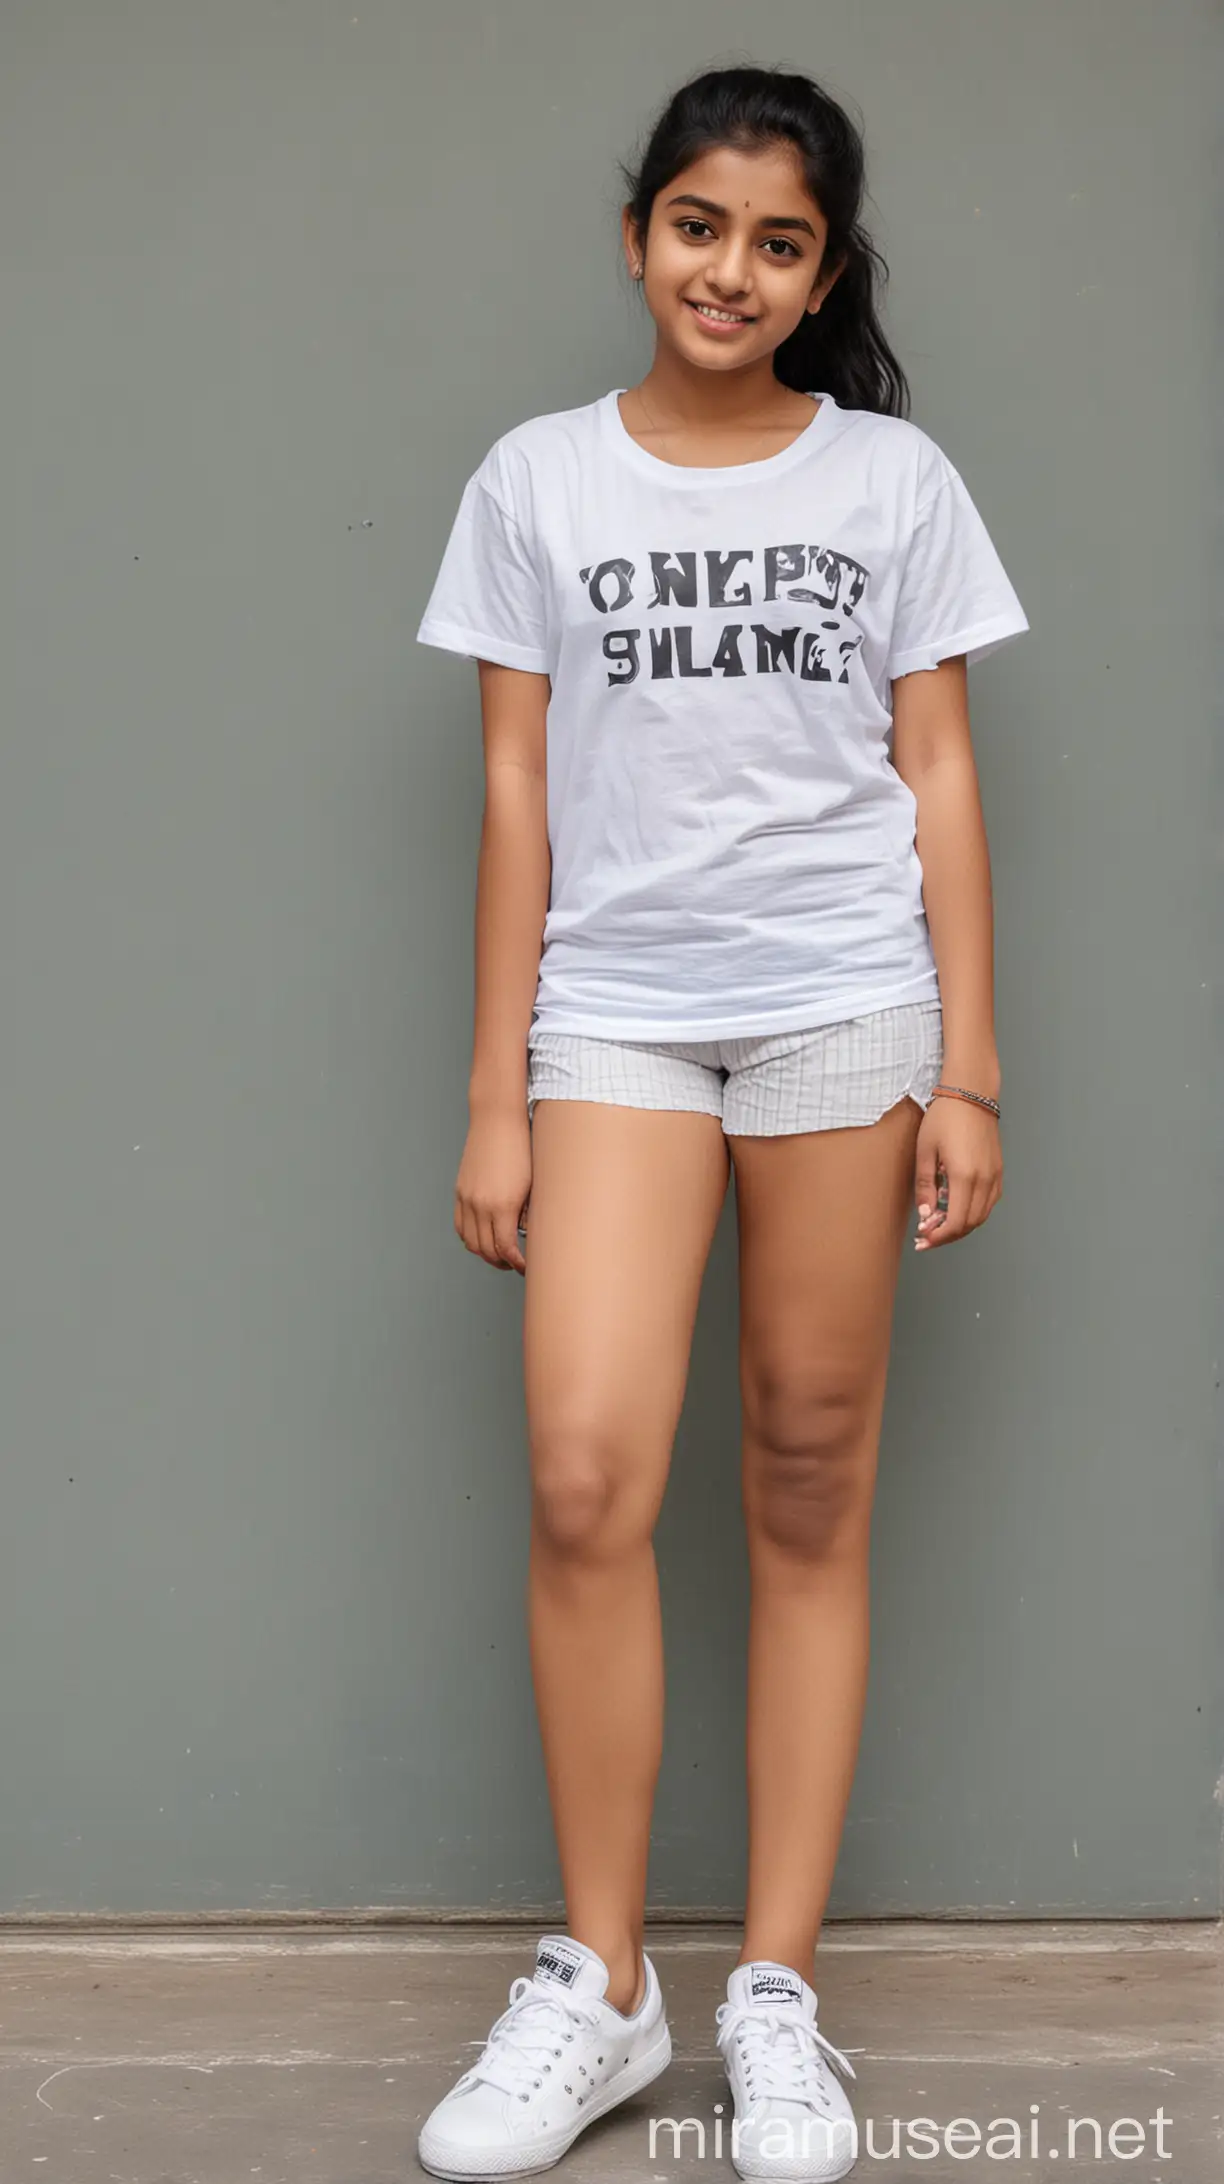 Cute Indian Teen Girl in Stylish Casual Wear with White Sneakers